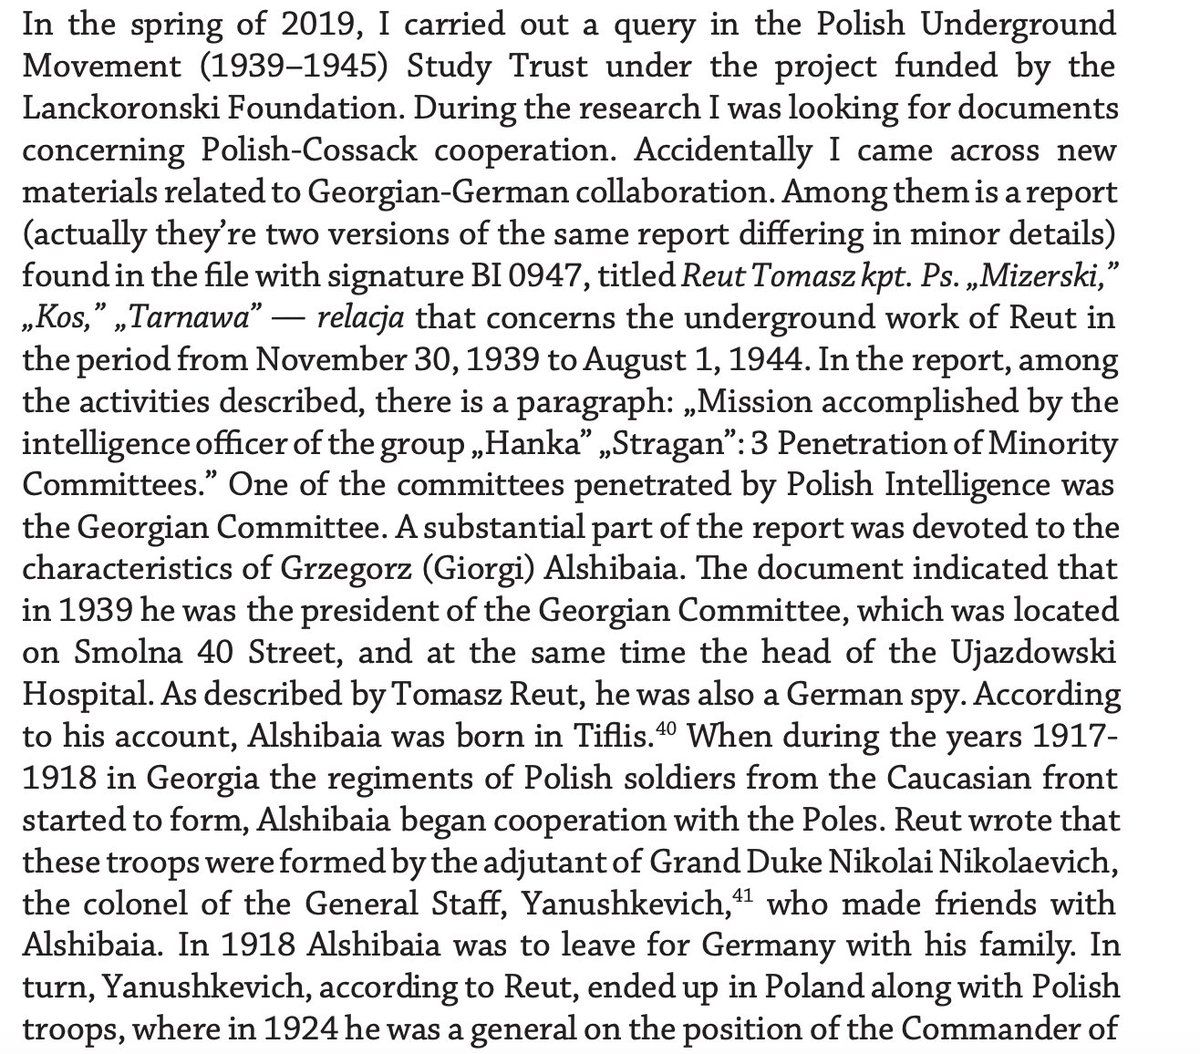 oh, also the author of this paper found some documents that confirmed the nazi spy ring was real